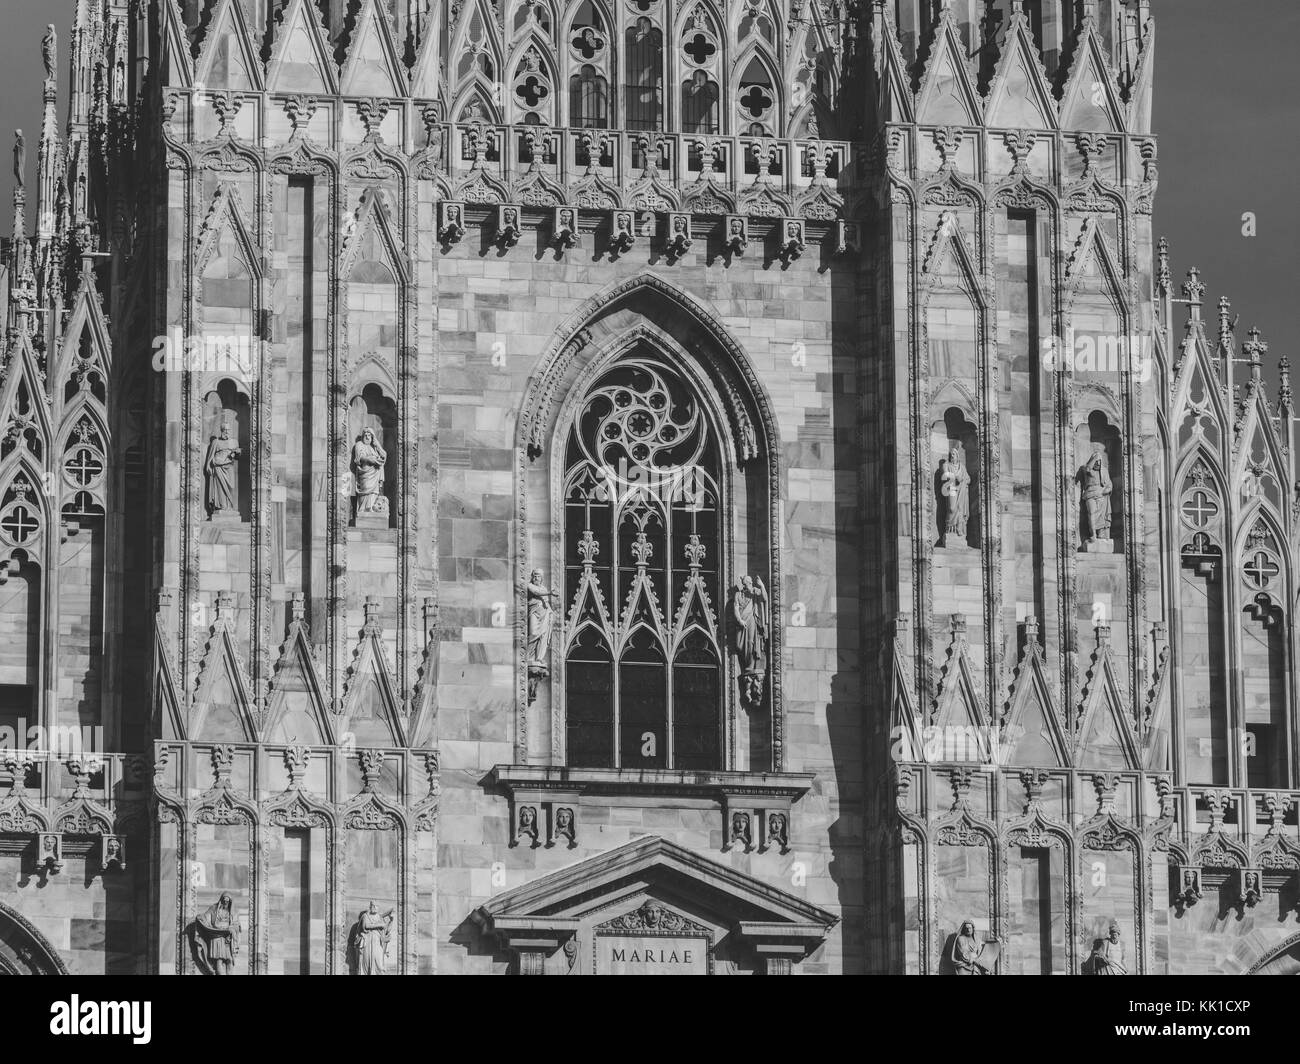 View of architectural details on the massive gothic cathedral Duomo, Milan, Italy. Black and white photography. Stock Photo